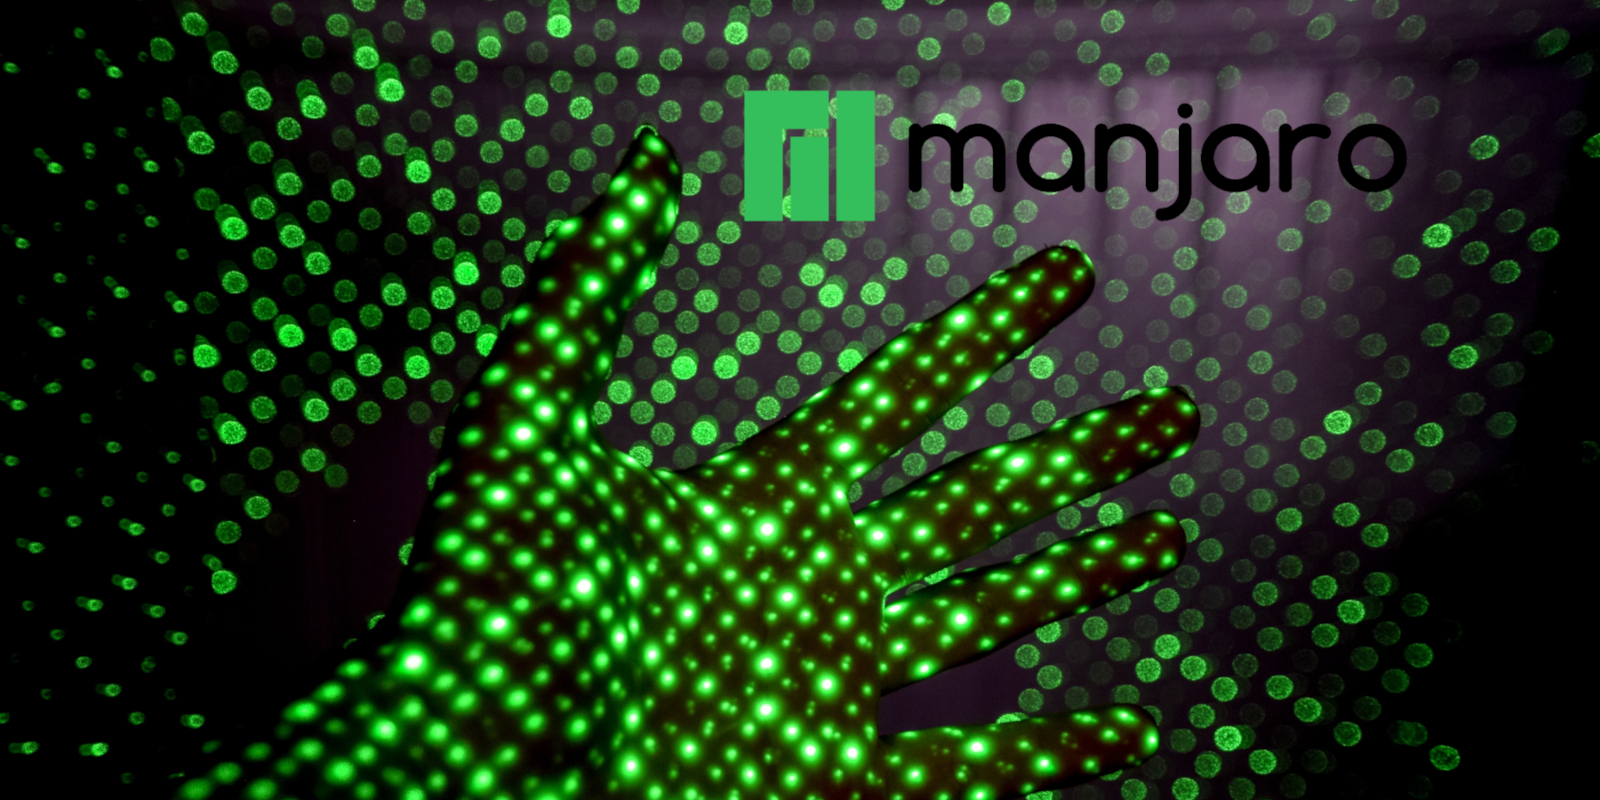 5 Things to do IMMEDIATELY After Installing Manjaro